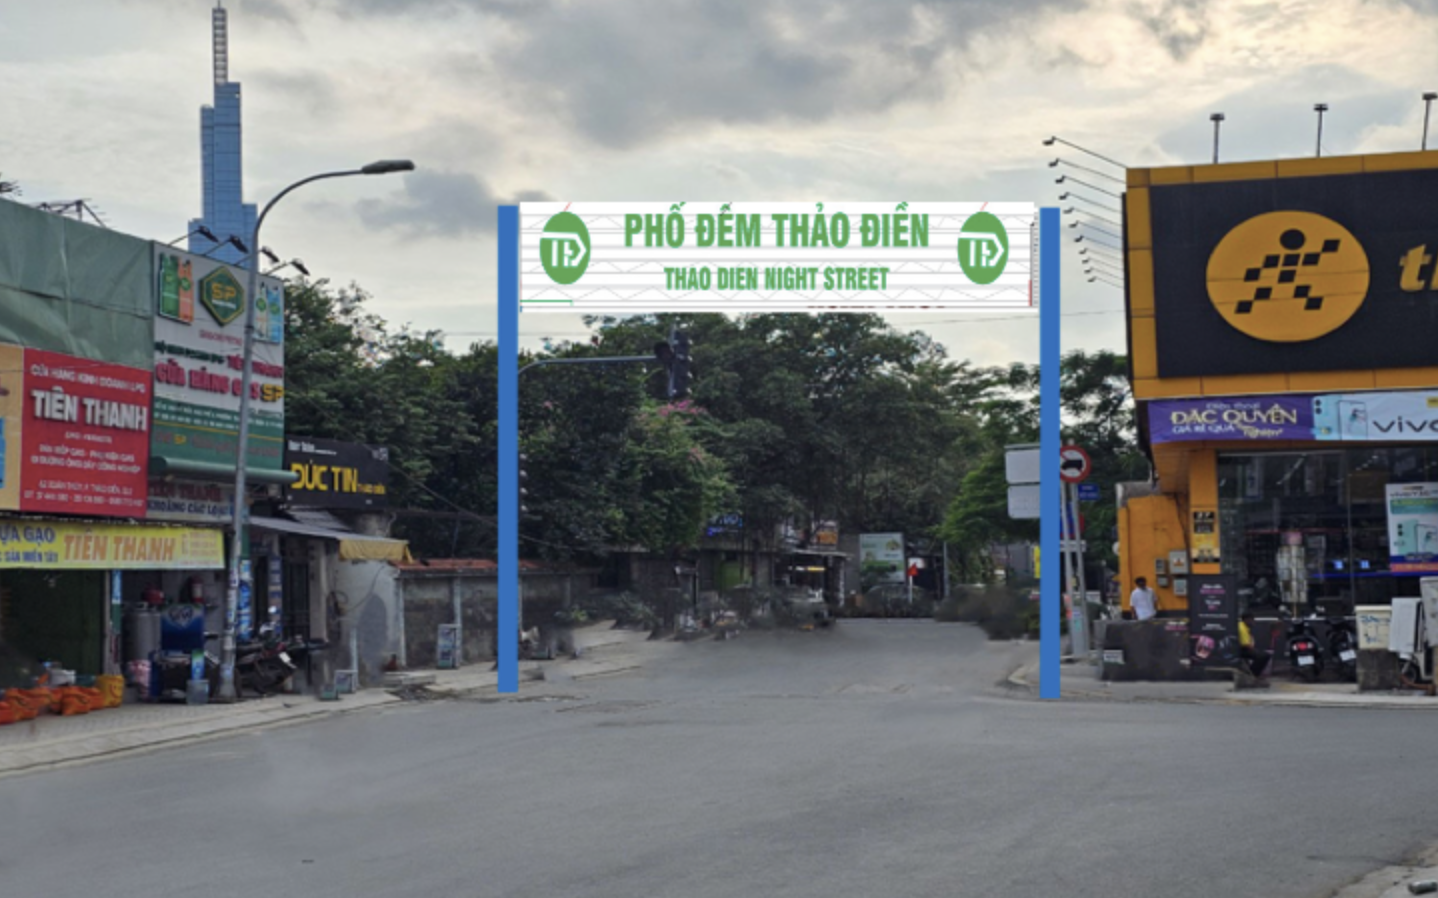 Ho Chi Minh City to open Thao Dien Night Street this week